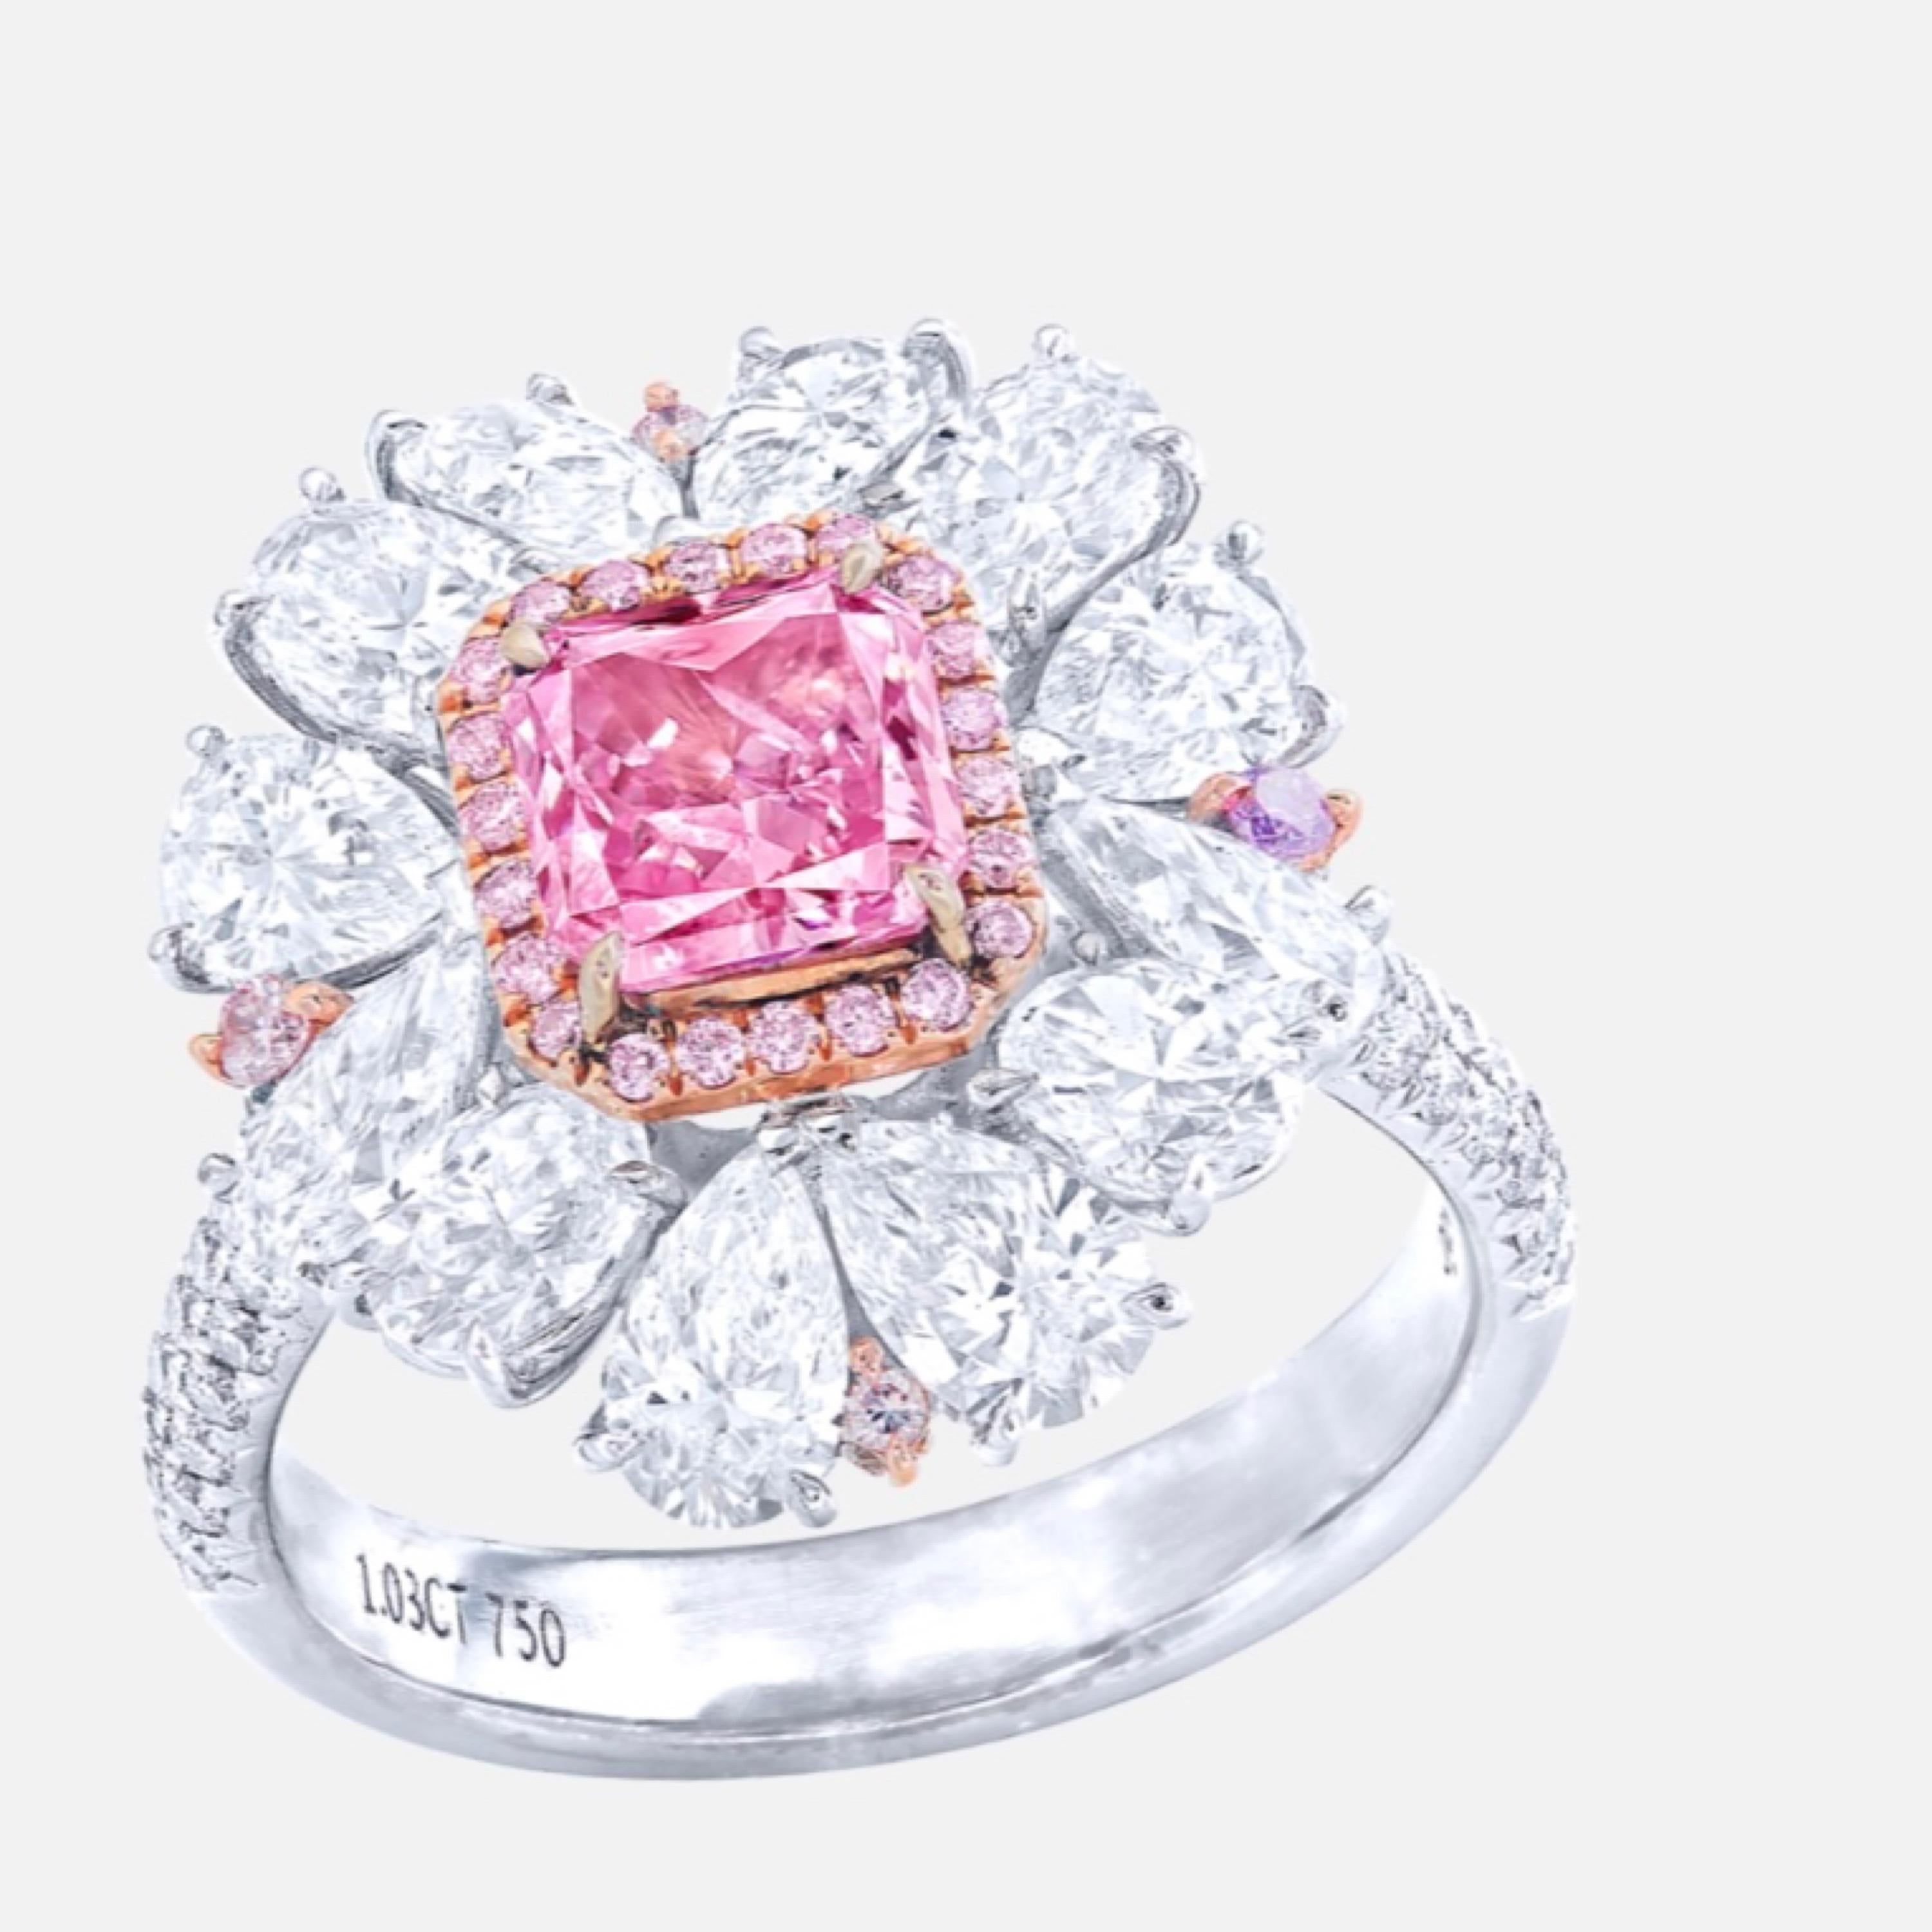 From the Museum vault at Emilio Jewelry, Located On New York’s Iconic Fifth Avenue:
Showcasing a magnificent natural Gia certified natural Fancy Intense Purplish Pink diamond in the center weighing just over 1 carat. This ultra rare center stone has